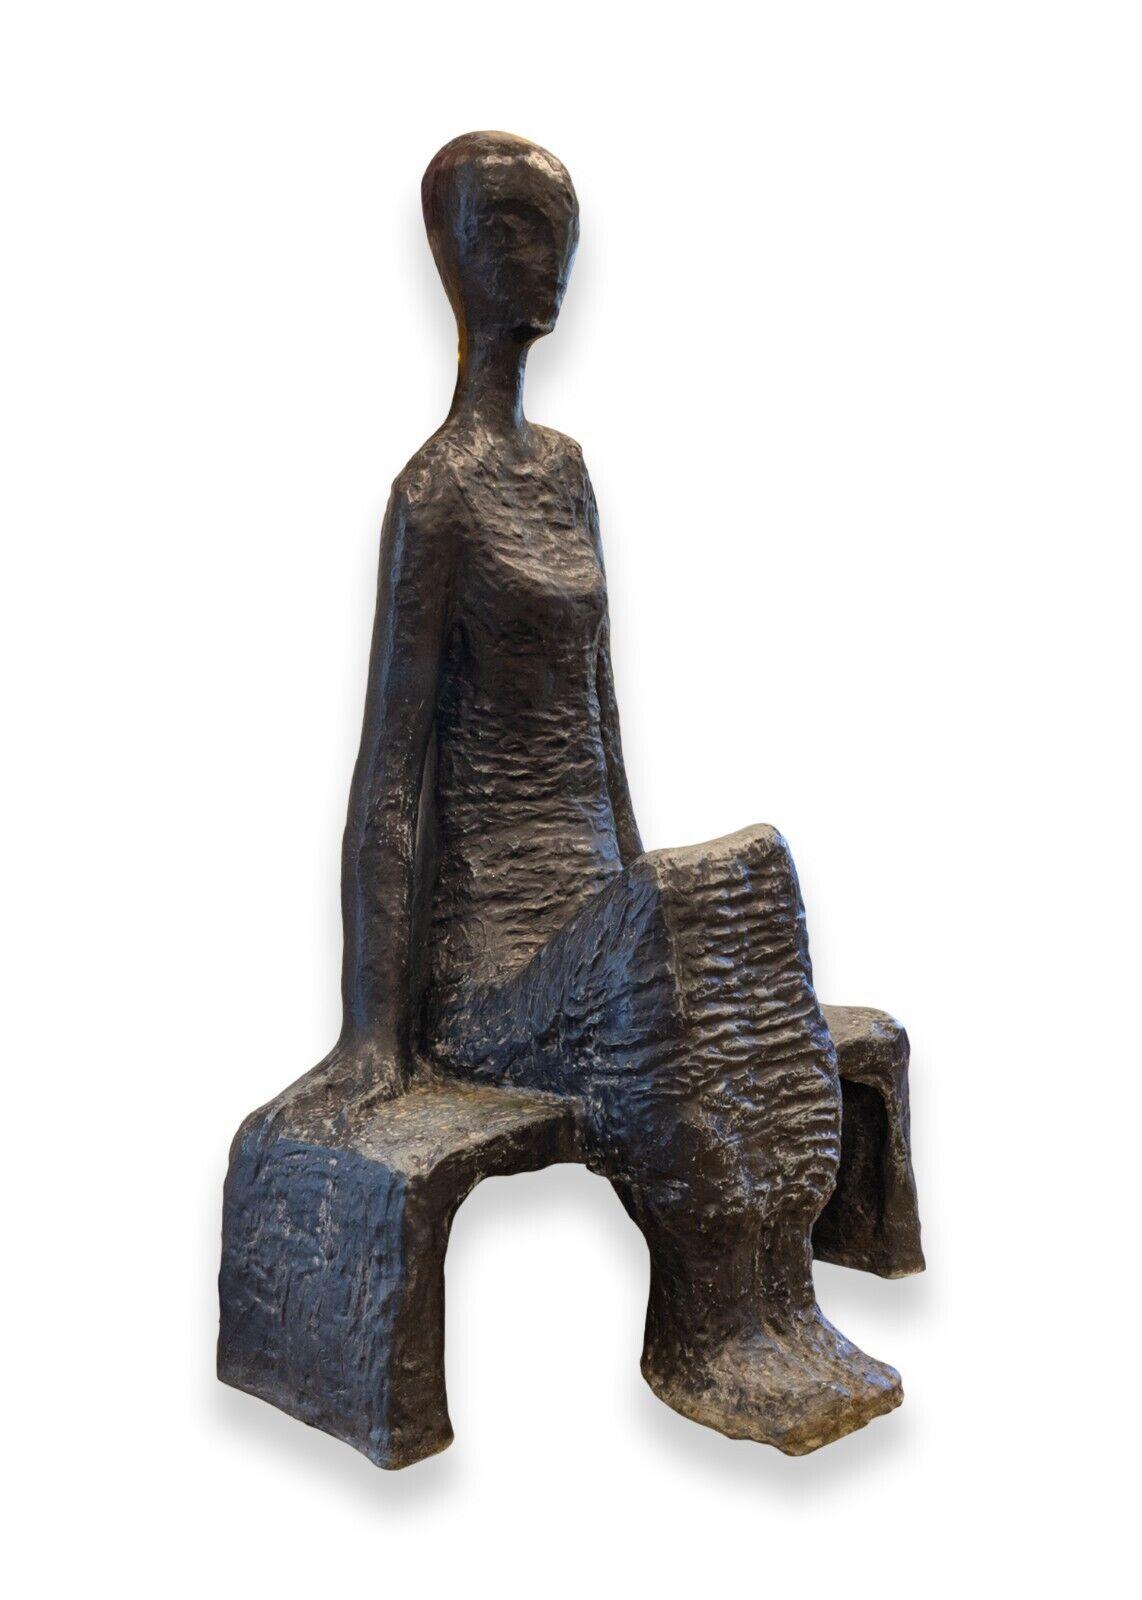 A minimalist modernist bronze sculpture depicting an abstract seated figure by German Israeli artist Noemi Schindler. Circa mid-20th century. The composition is elegant with a brutalist quality and the figure evokes a meditative or Zen emotion. This